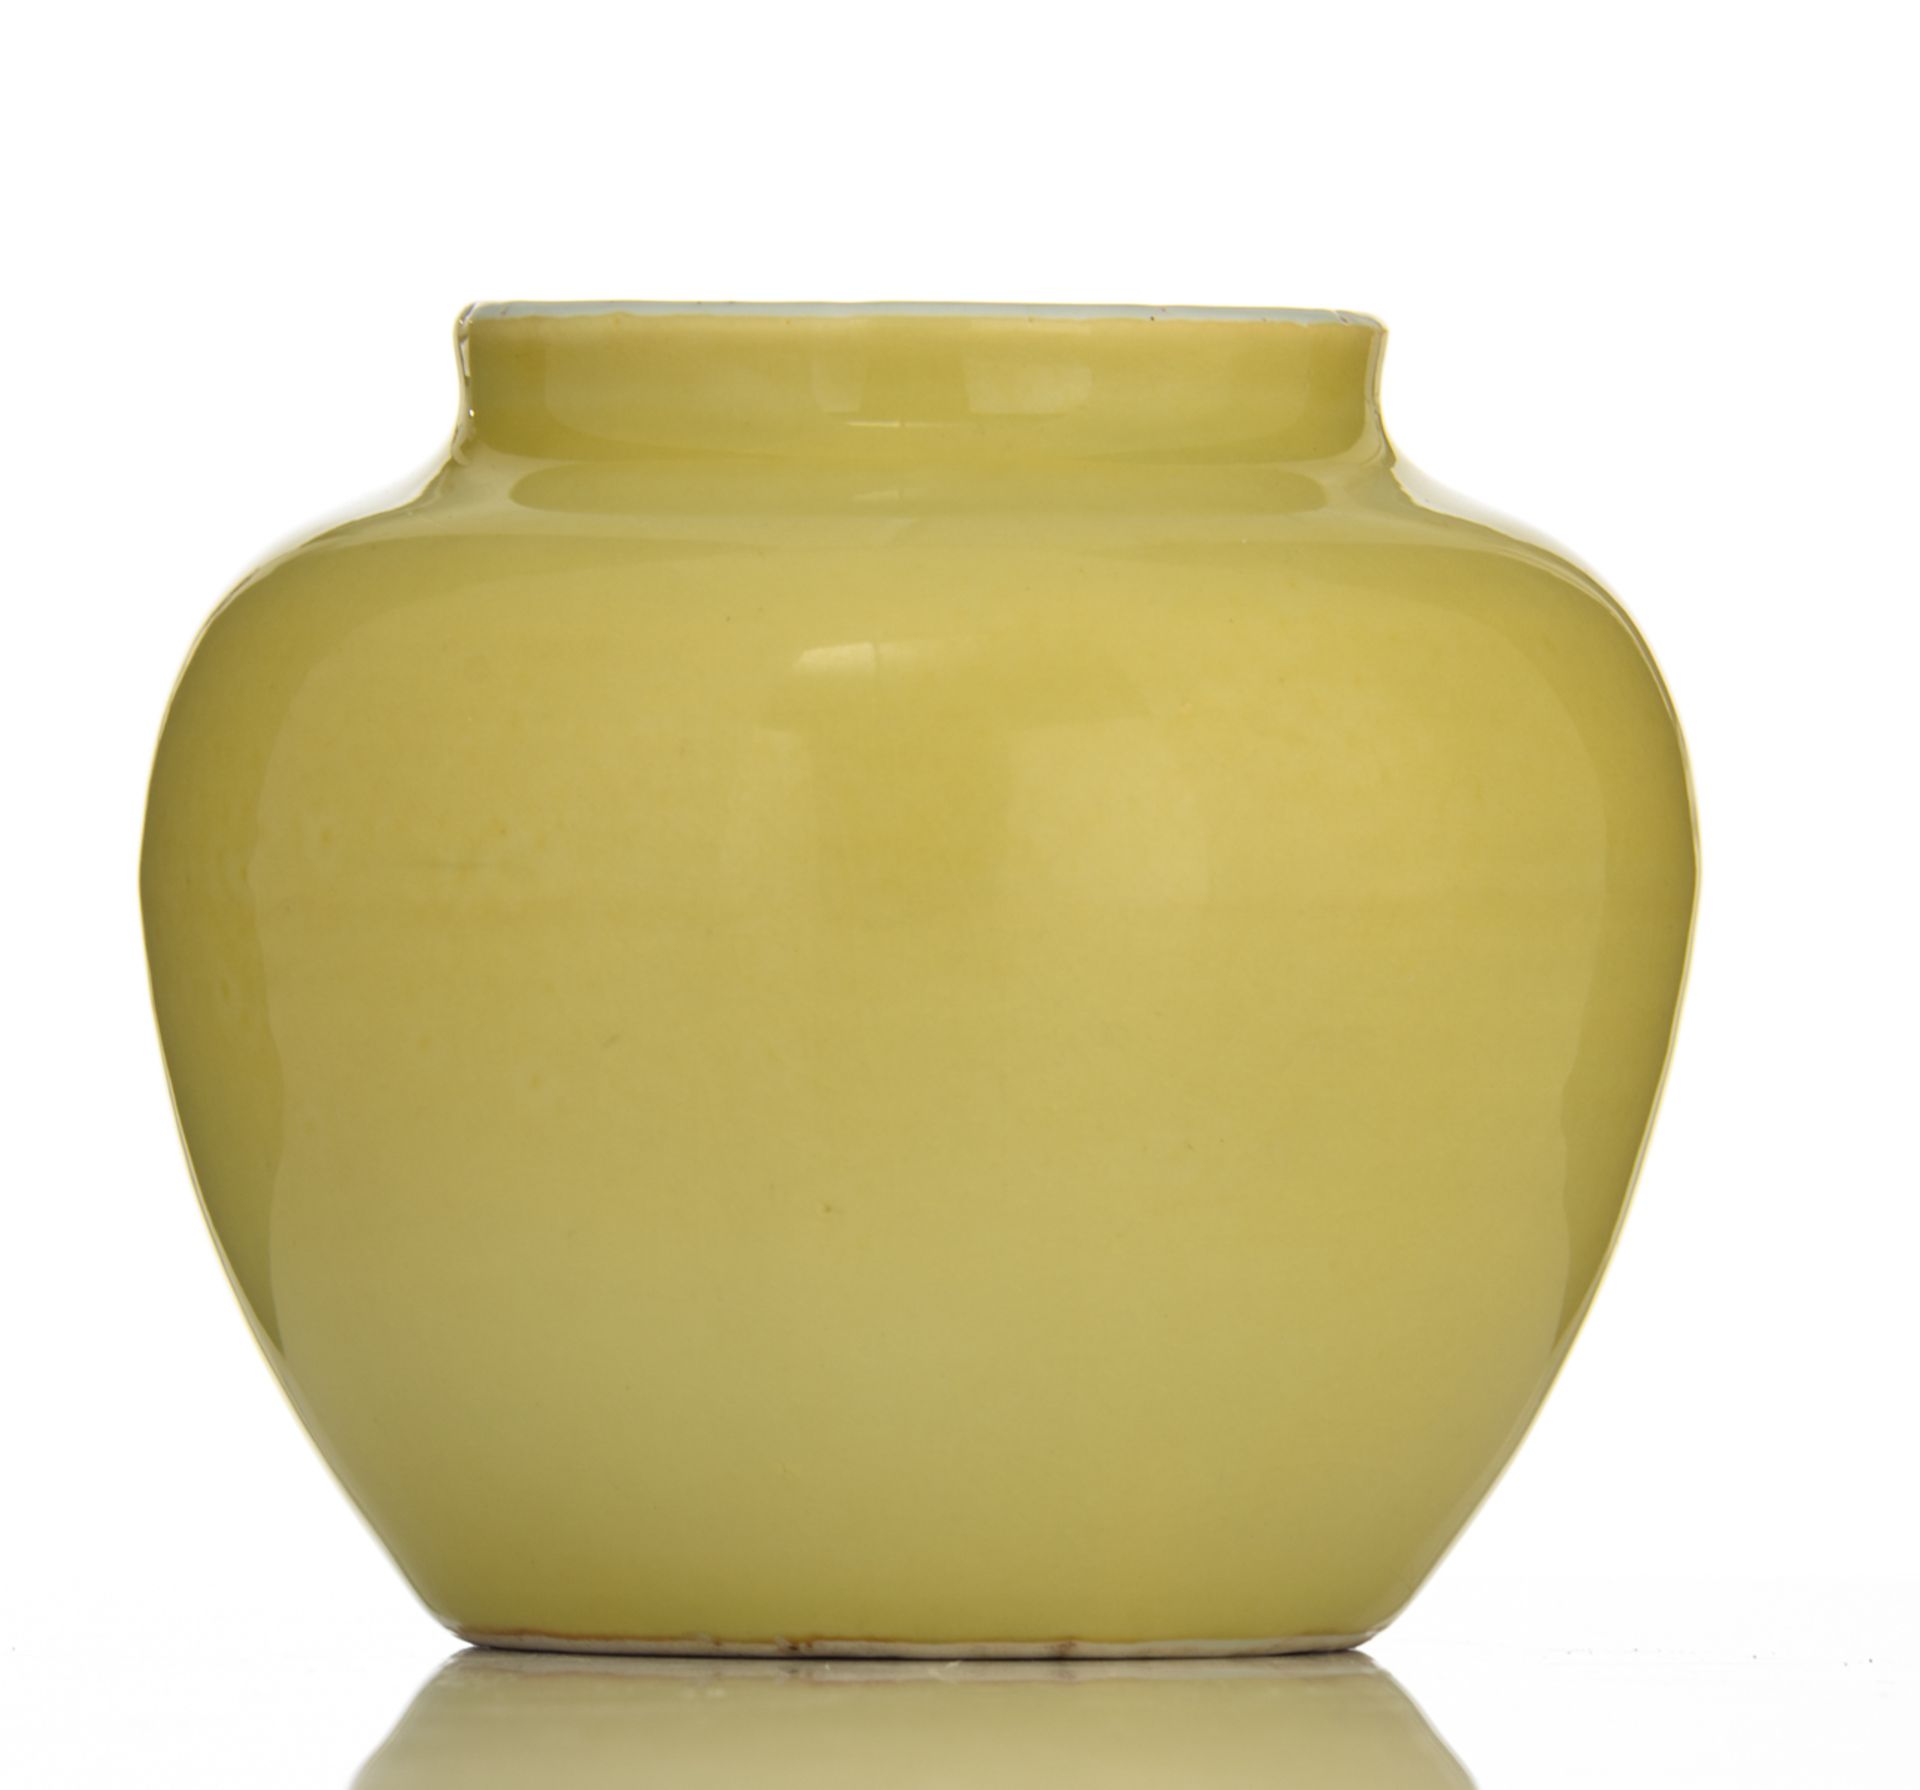 A Chinese yellow crackle-glazed jar, with a Jiajing mark, H 13 - ø 15 cm - Image 5 of 9